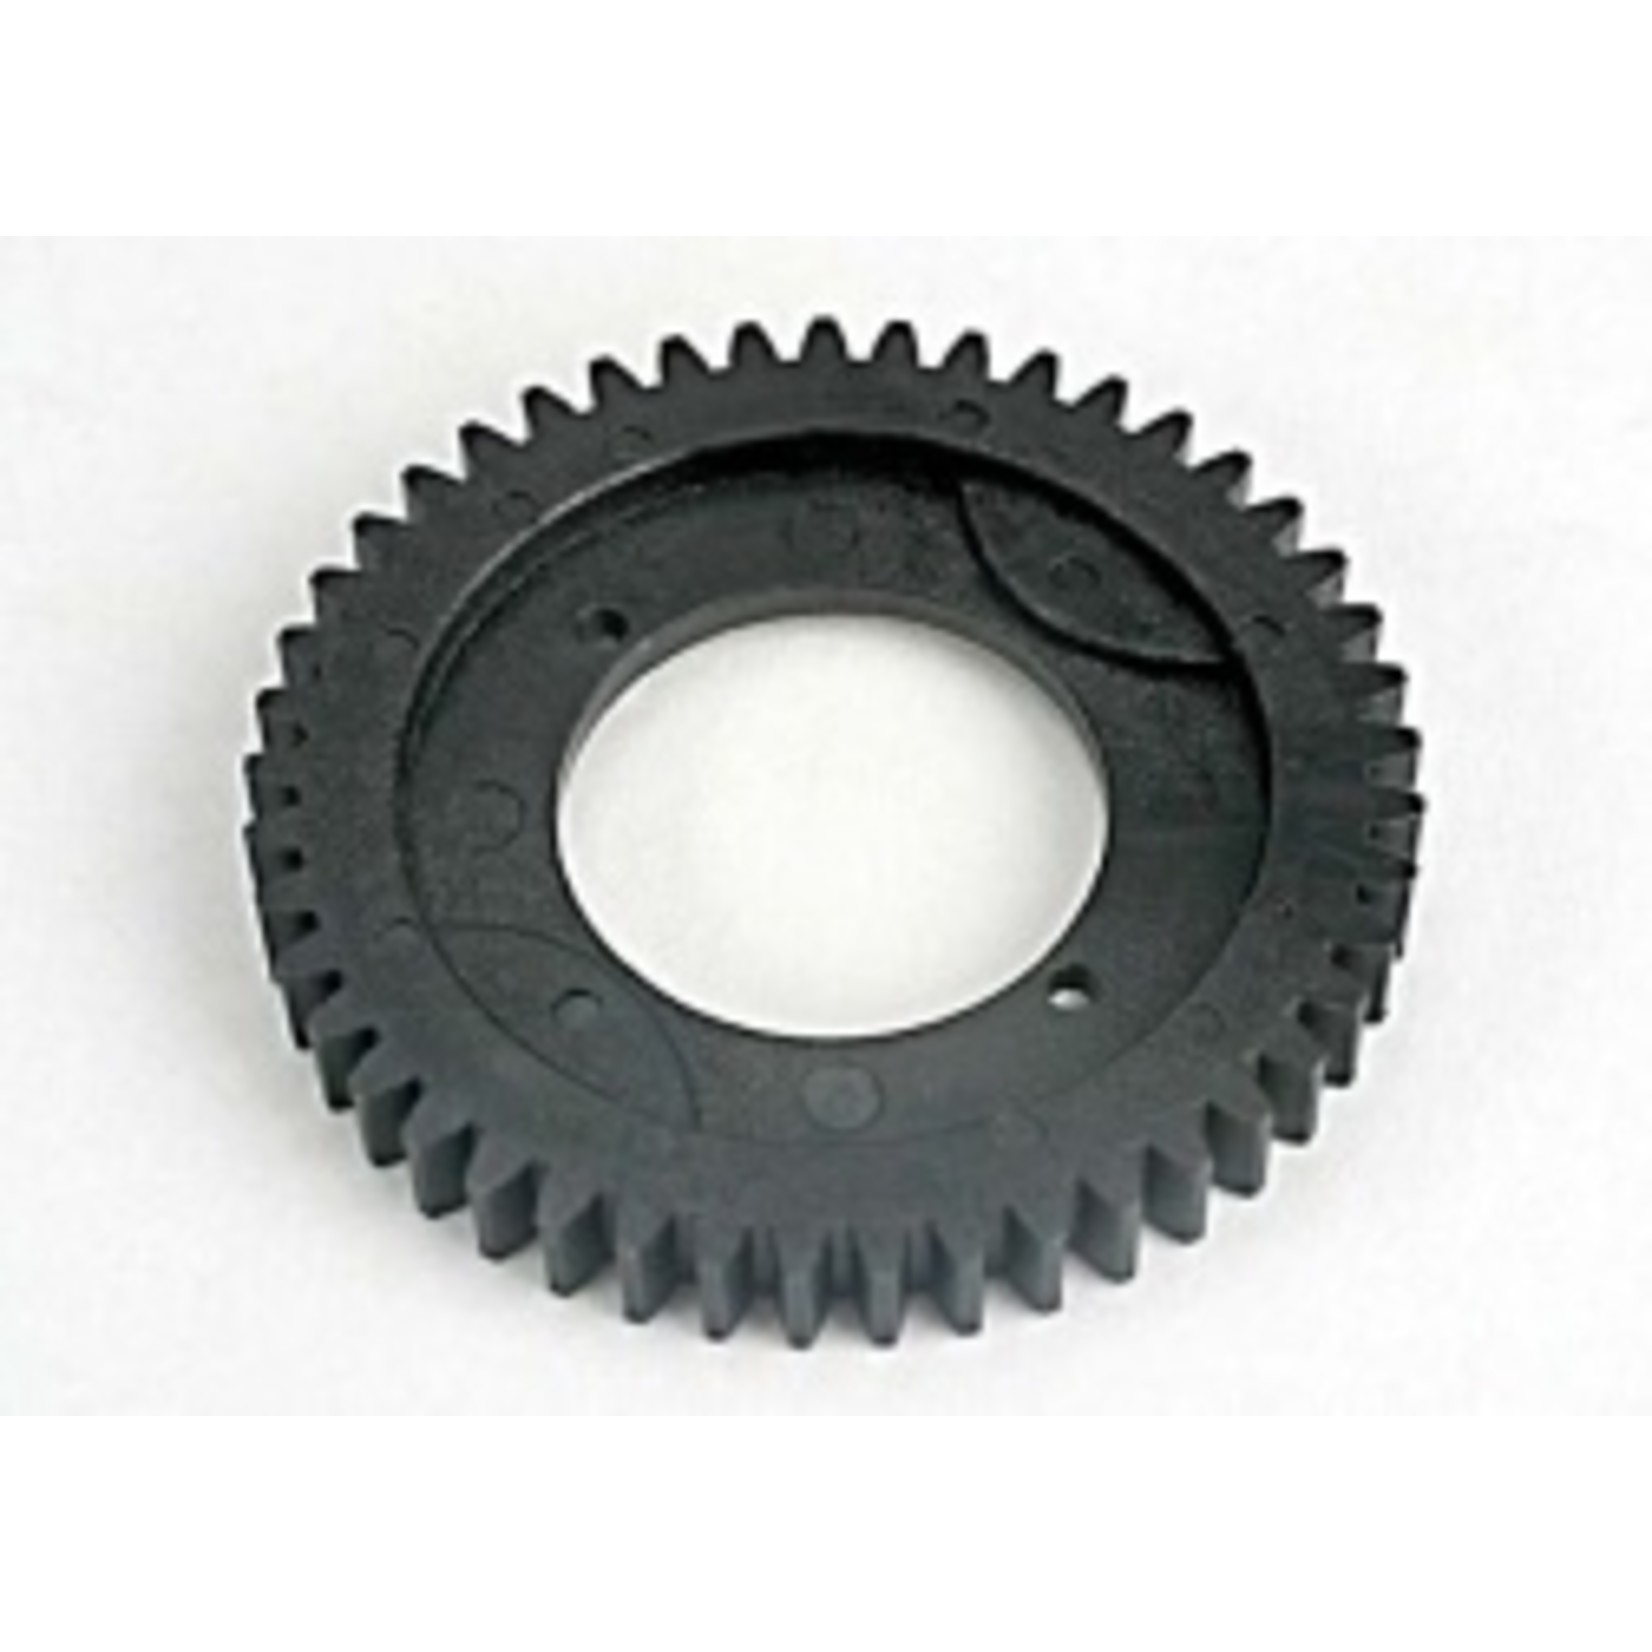 Traxxas Gear, 1st (optional)(45-tooth)